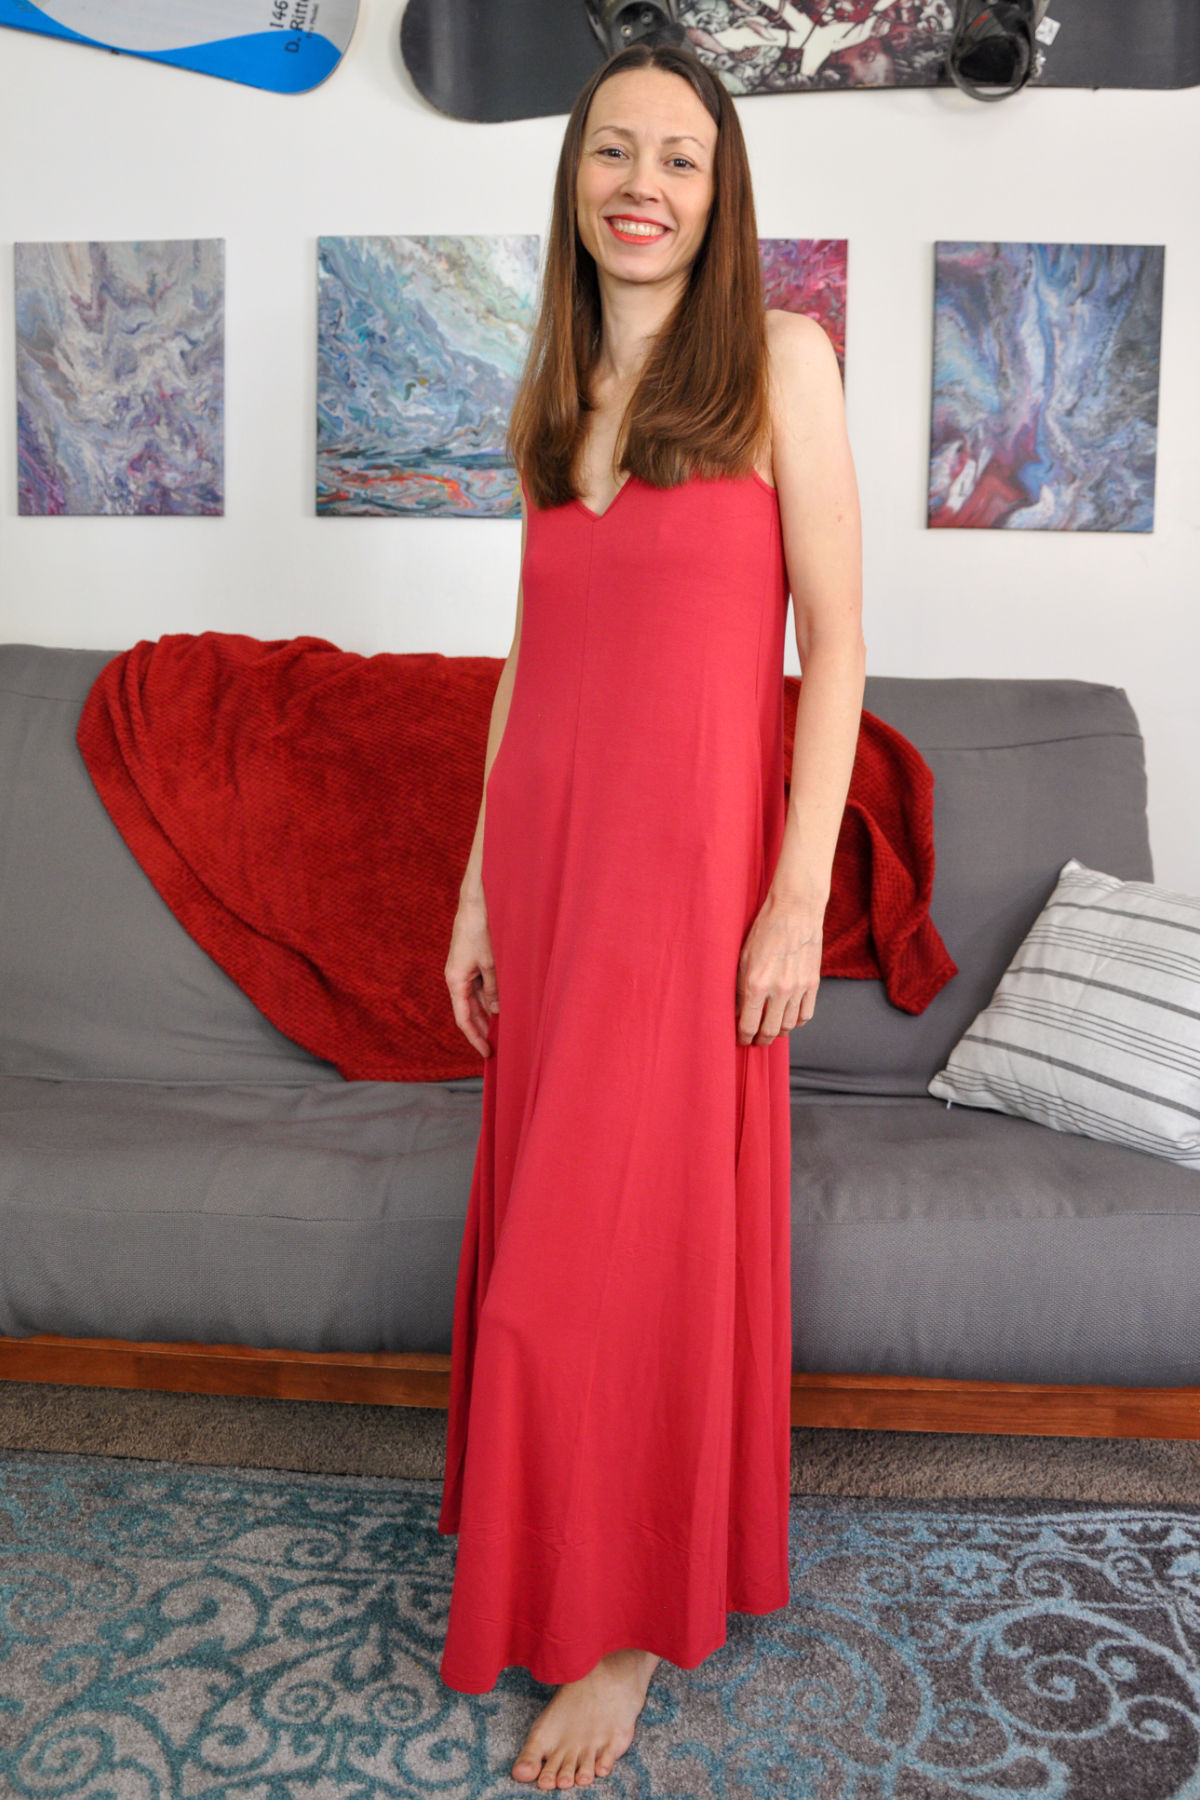 Chrystal standing in front of futon wearing Skivy's Goddess Gown in Crimson.